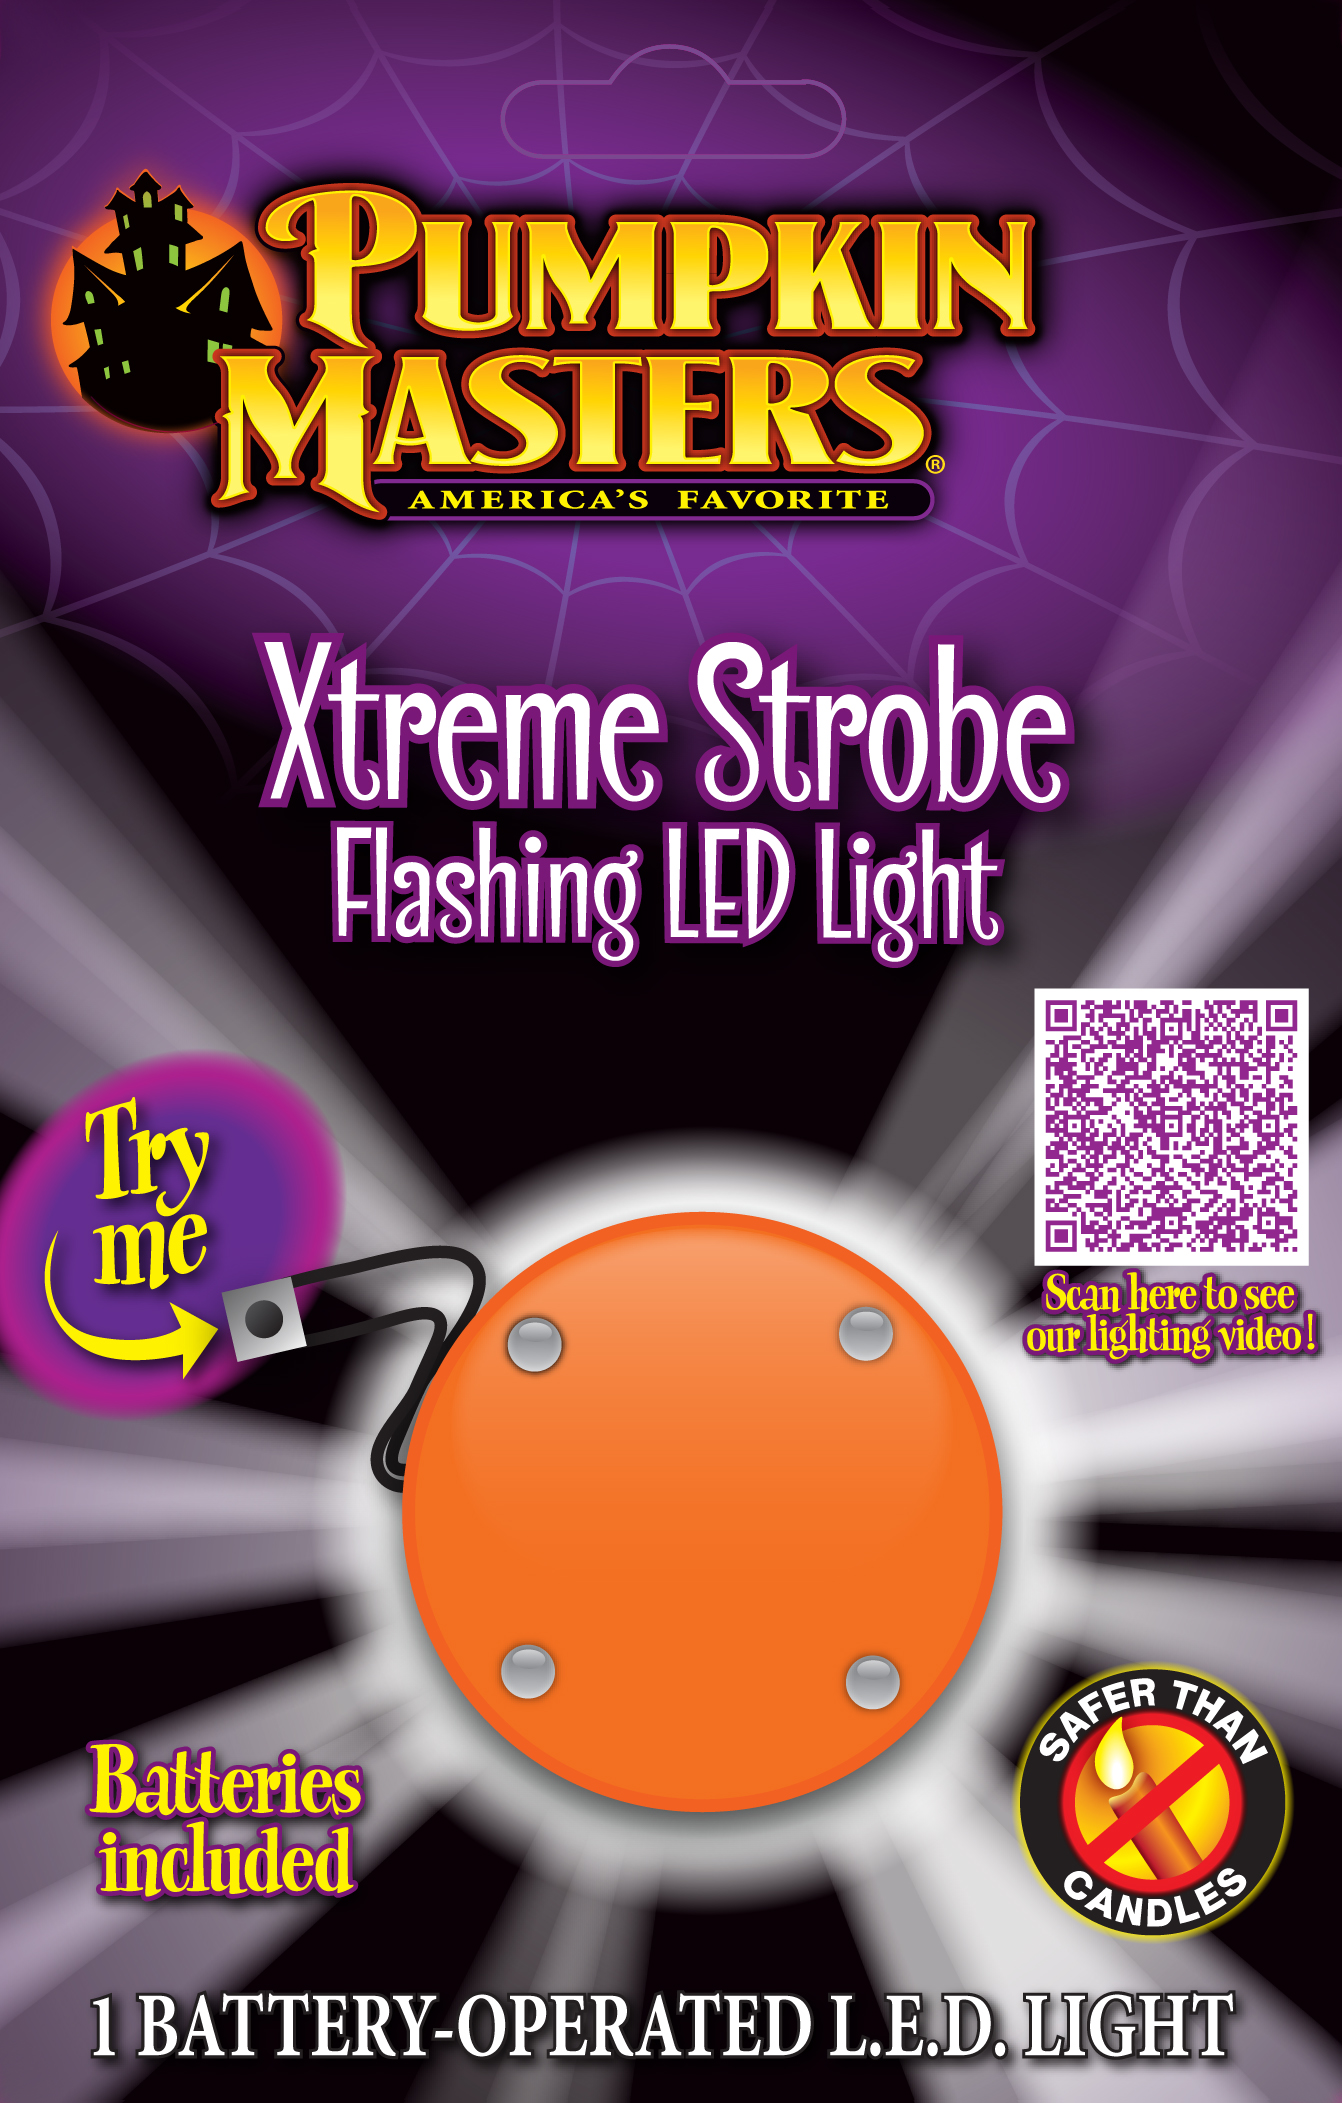 New! Xtreme Strobe Flashing LED available in white and multicolored light